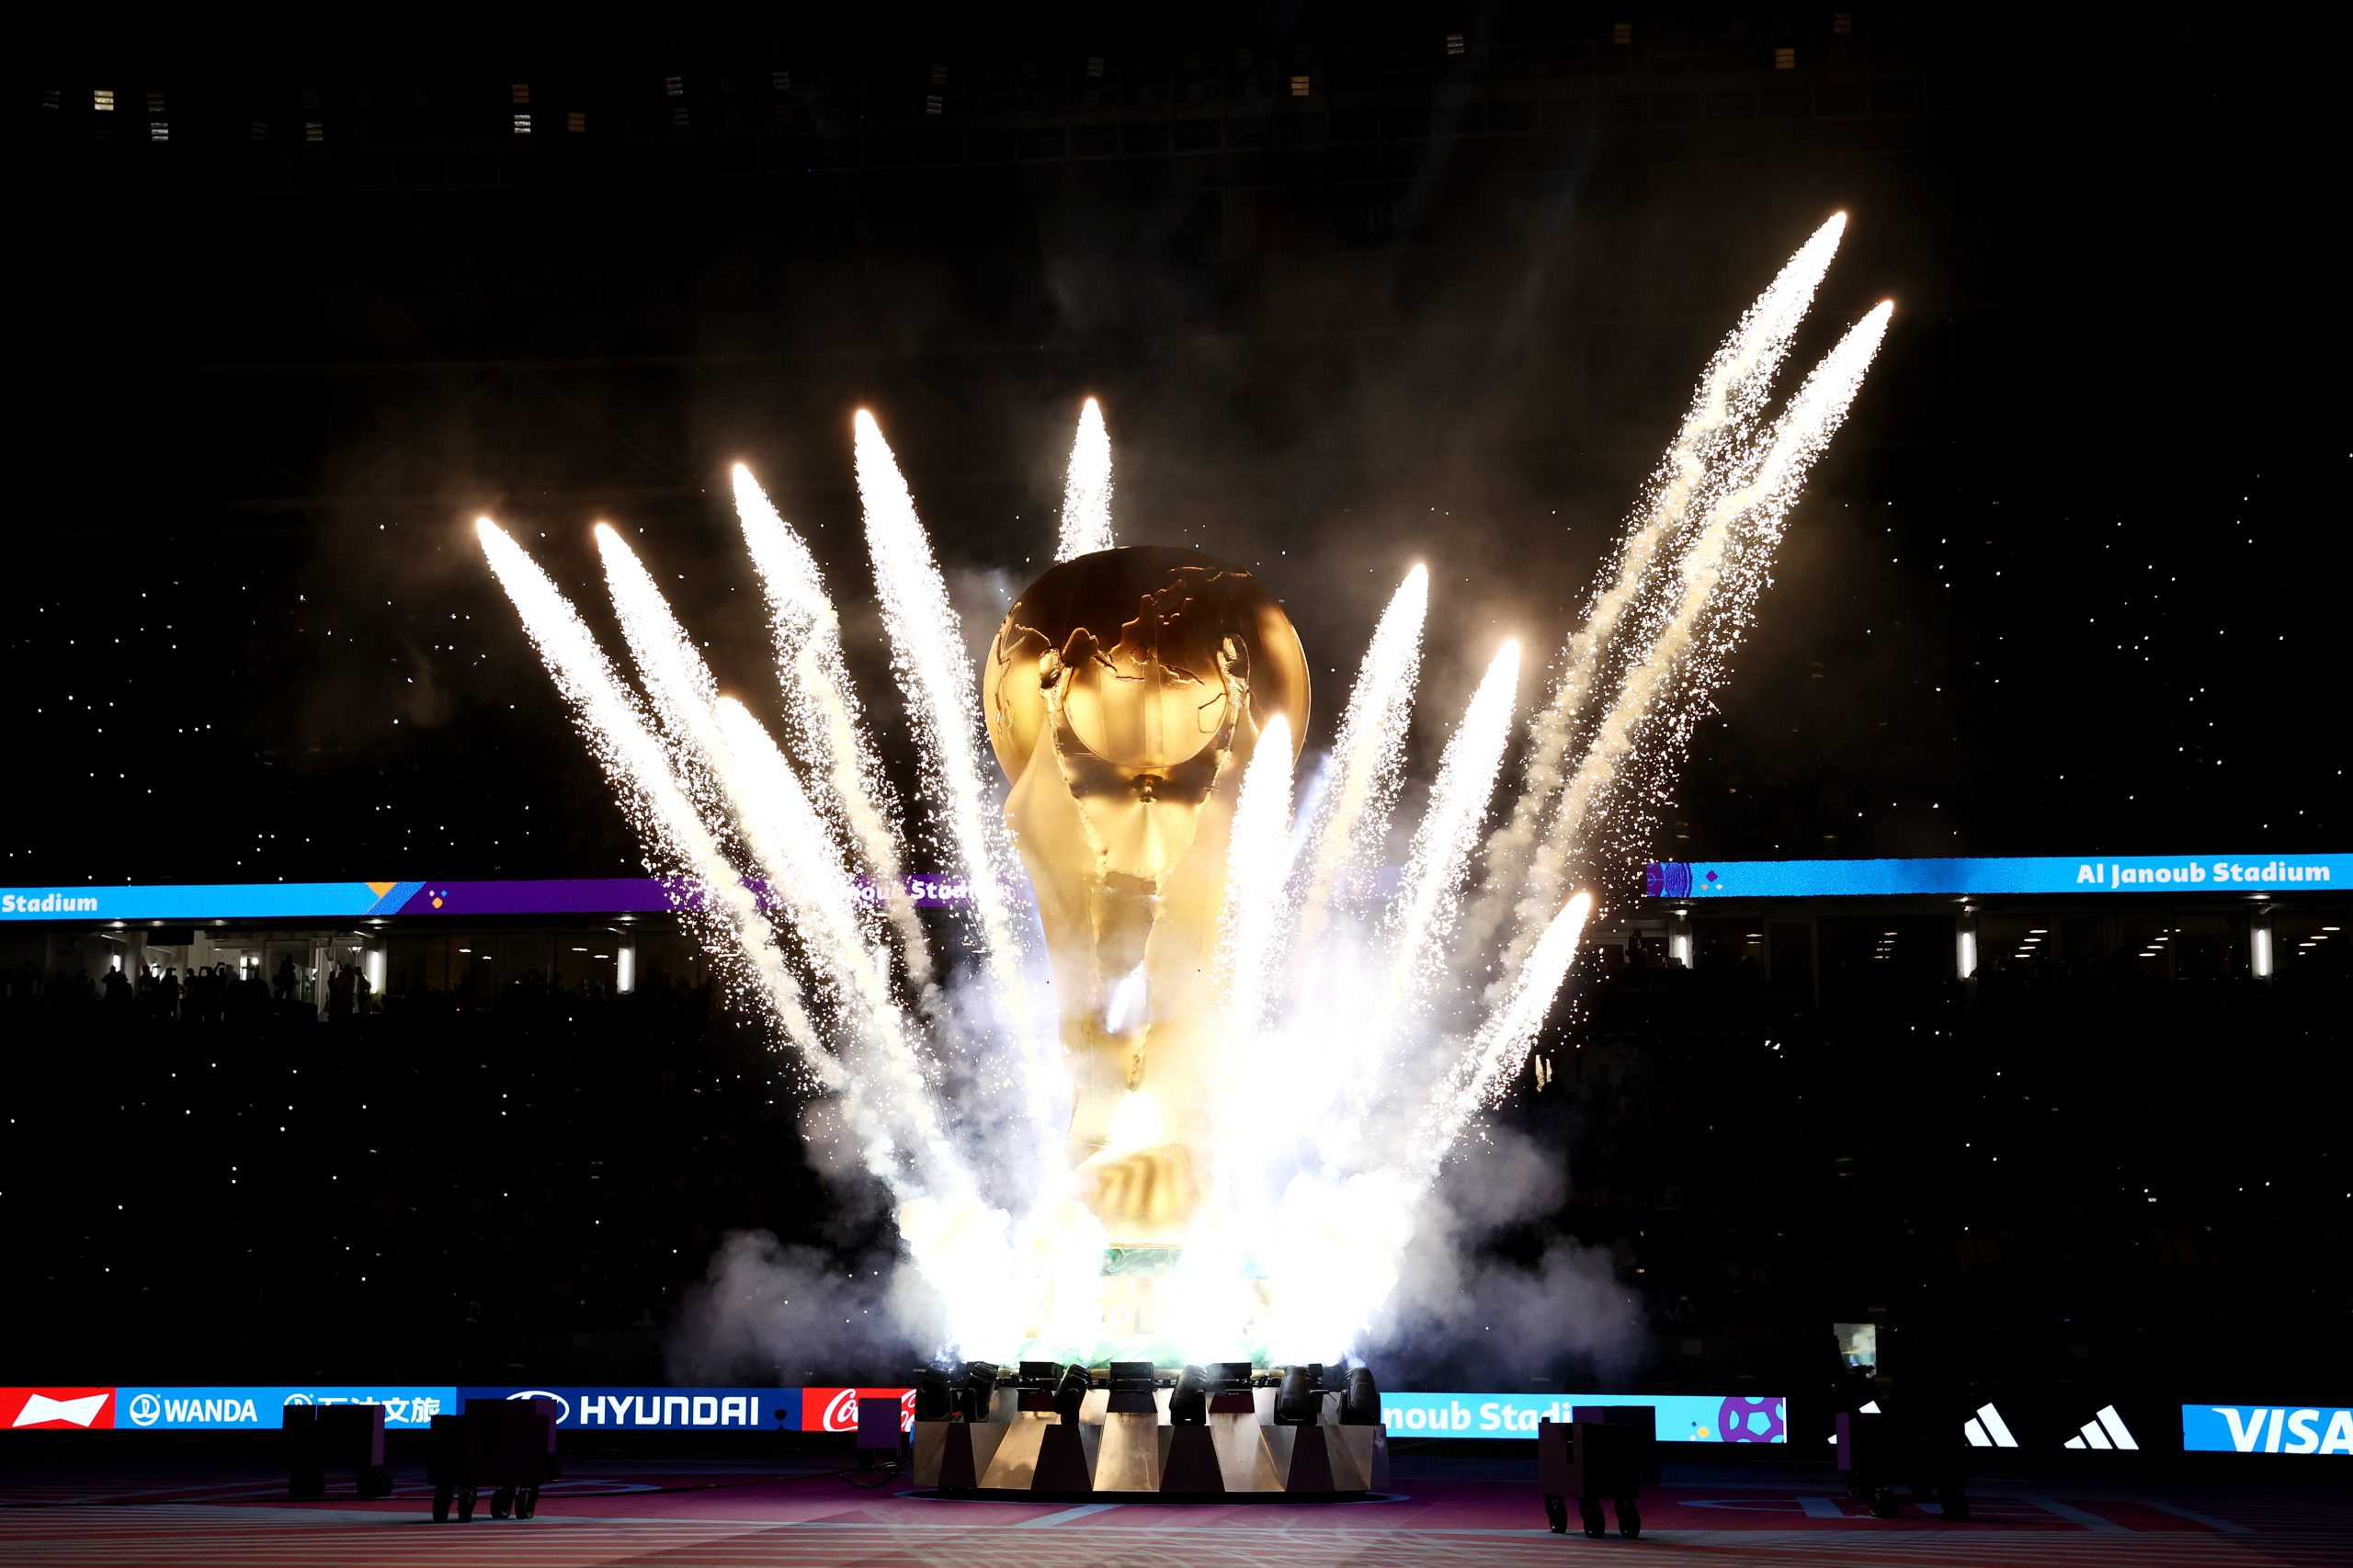 AL WAKRAH, QATAR - NOVEMBER 22: Pyrotechnics explode around a giant FIFA World Cup trophy prior to the FIFA World Cup Qatar 2022 Group D match between France and Australia at Al Janoub Stadium on November 22, 2022 in Al Wakrah, Qatar. (Photo by Robert Cianflone/Getty Images)